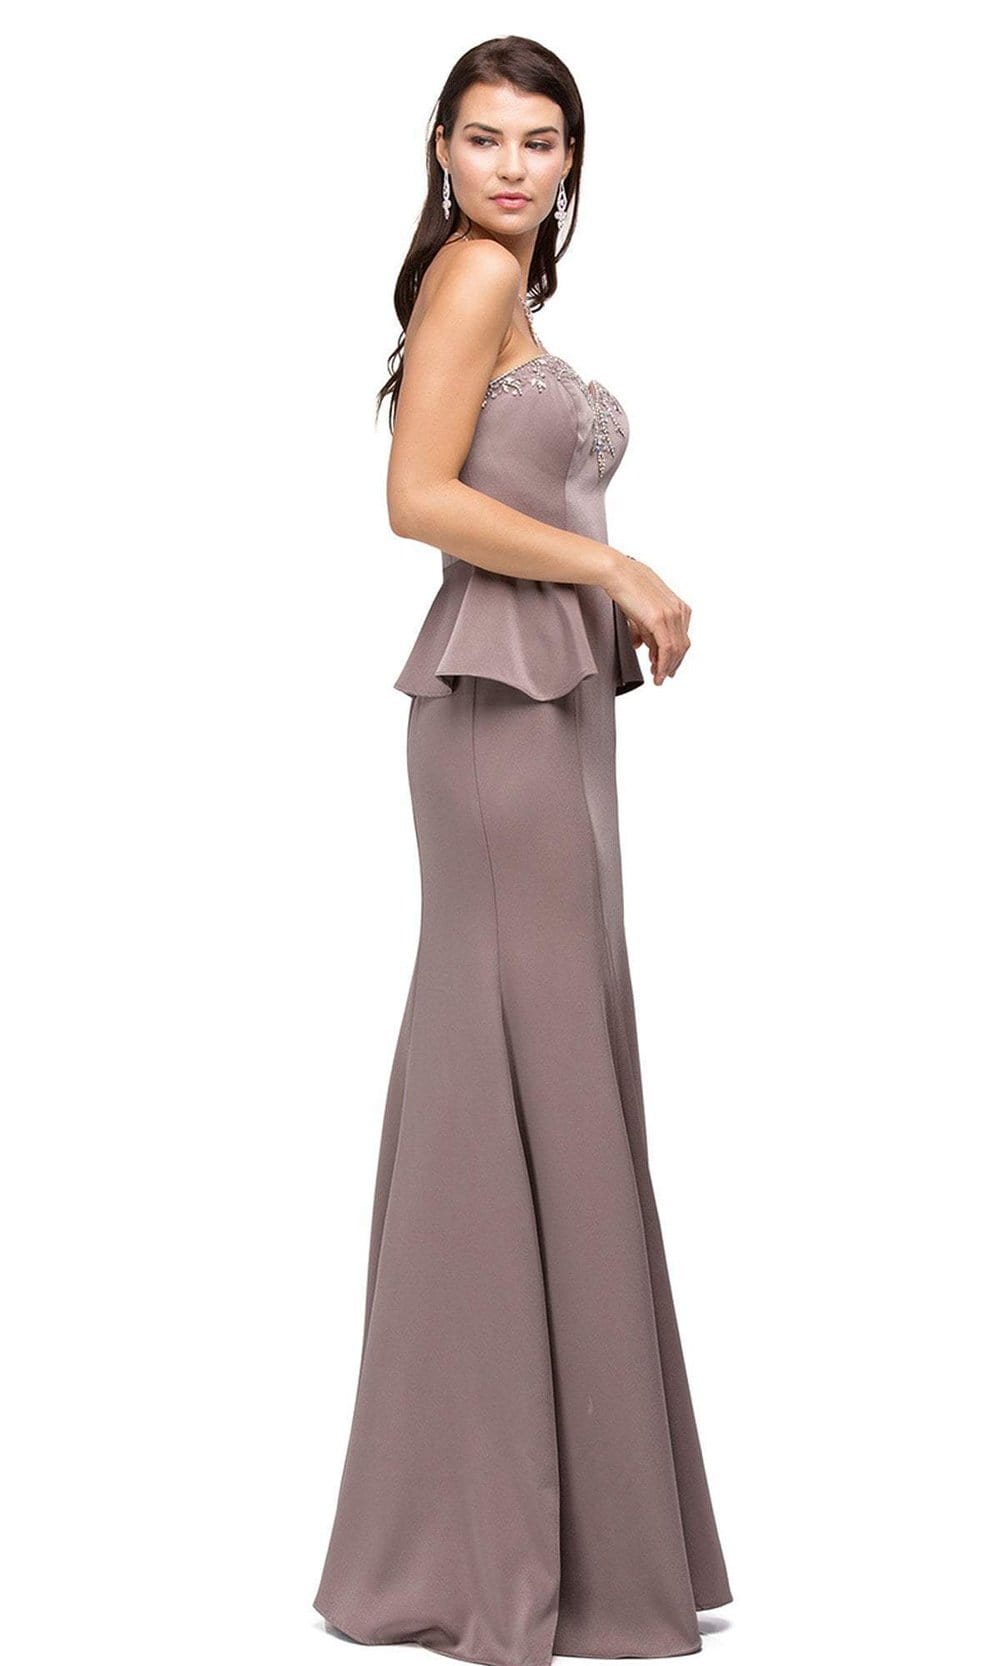 Dancing Queen - 9713 Strapless Sweetheart Prom Dress with Side Peplum Bridesmaid Dresses XS / Mocha